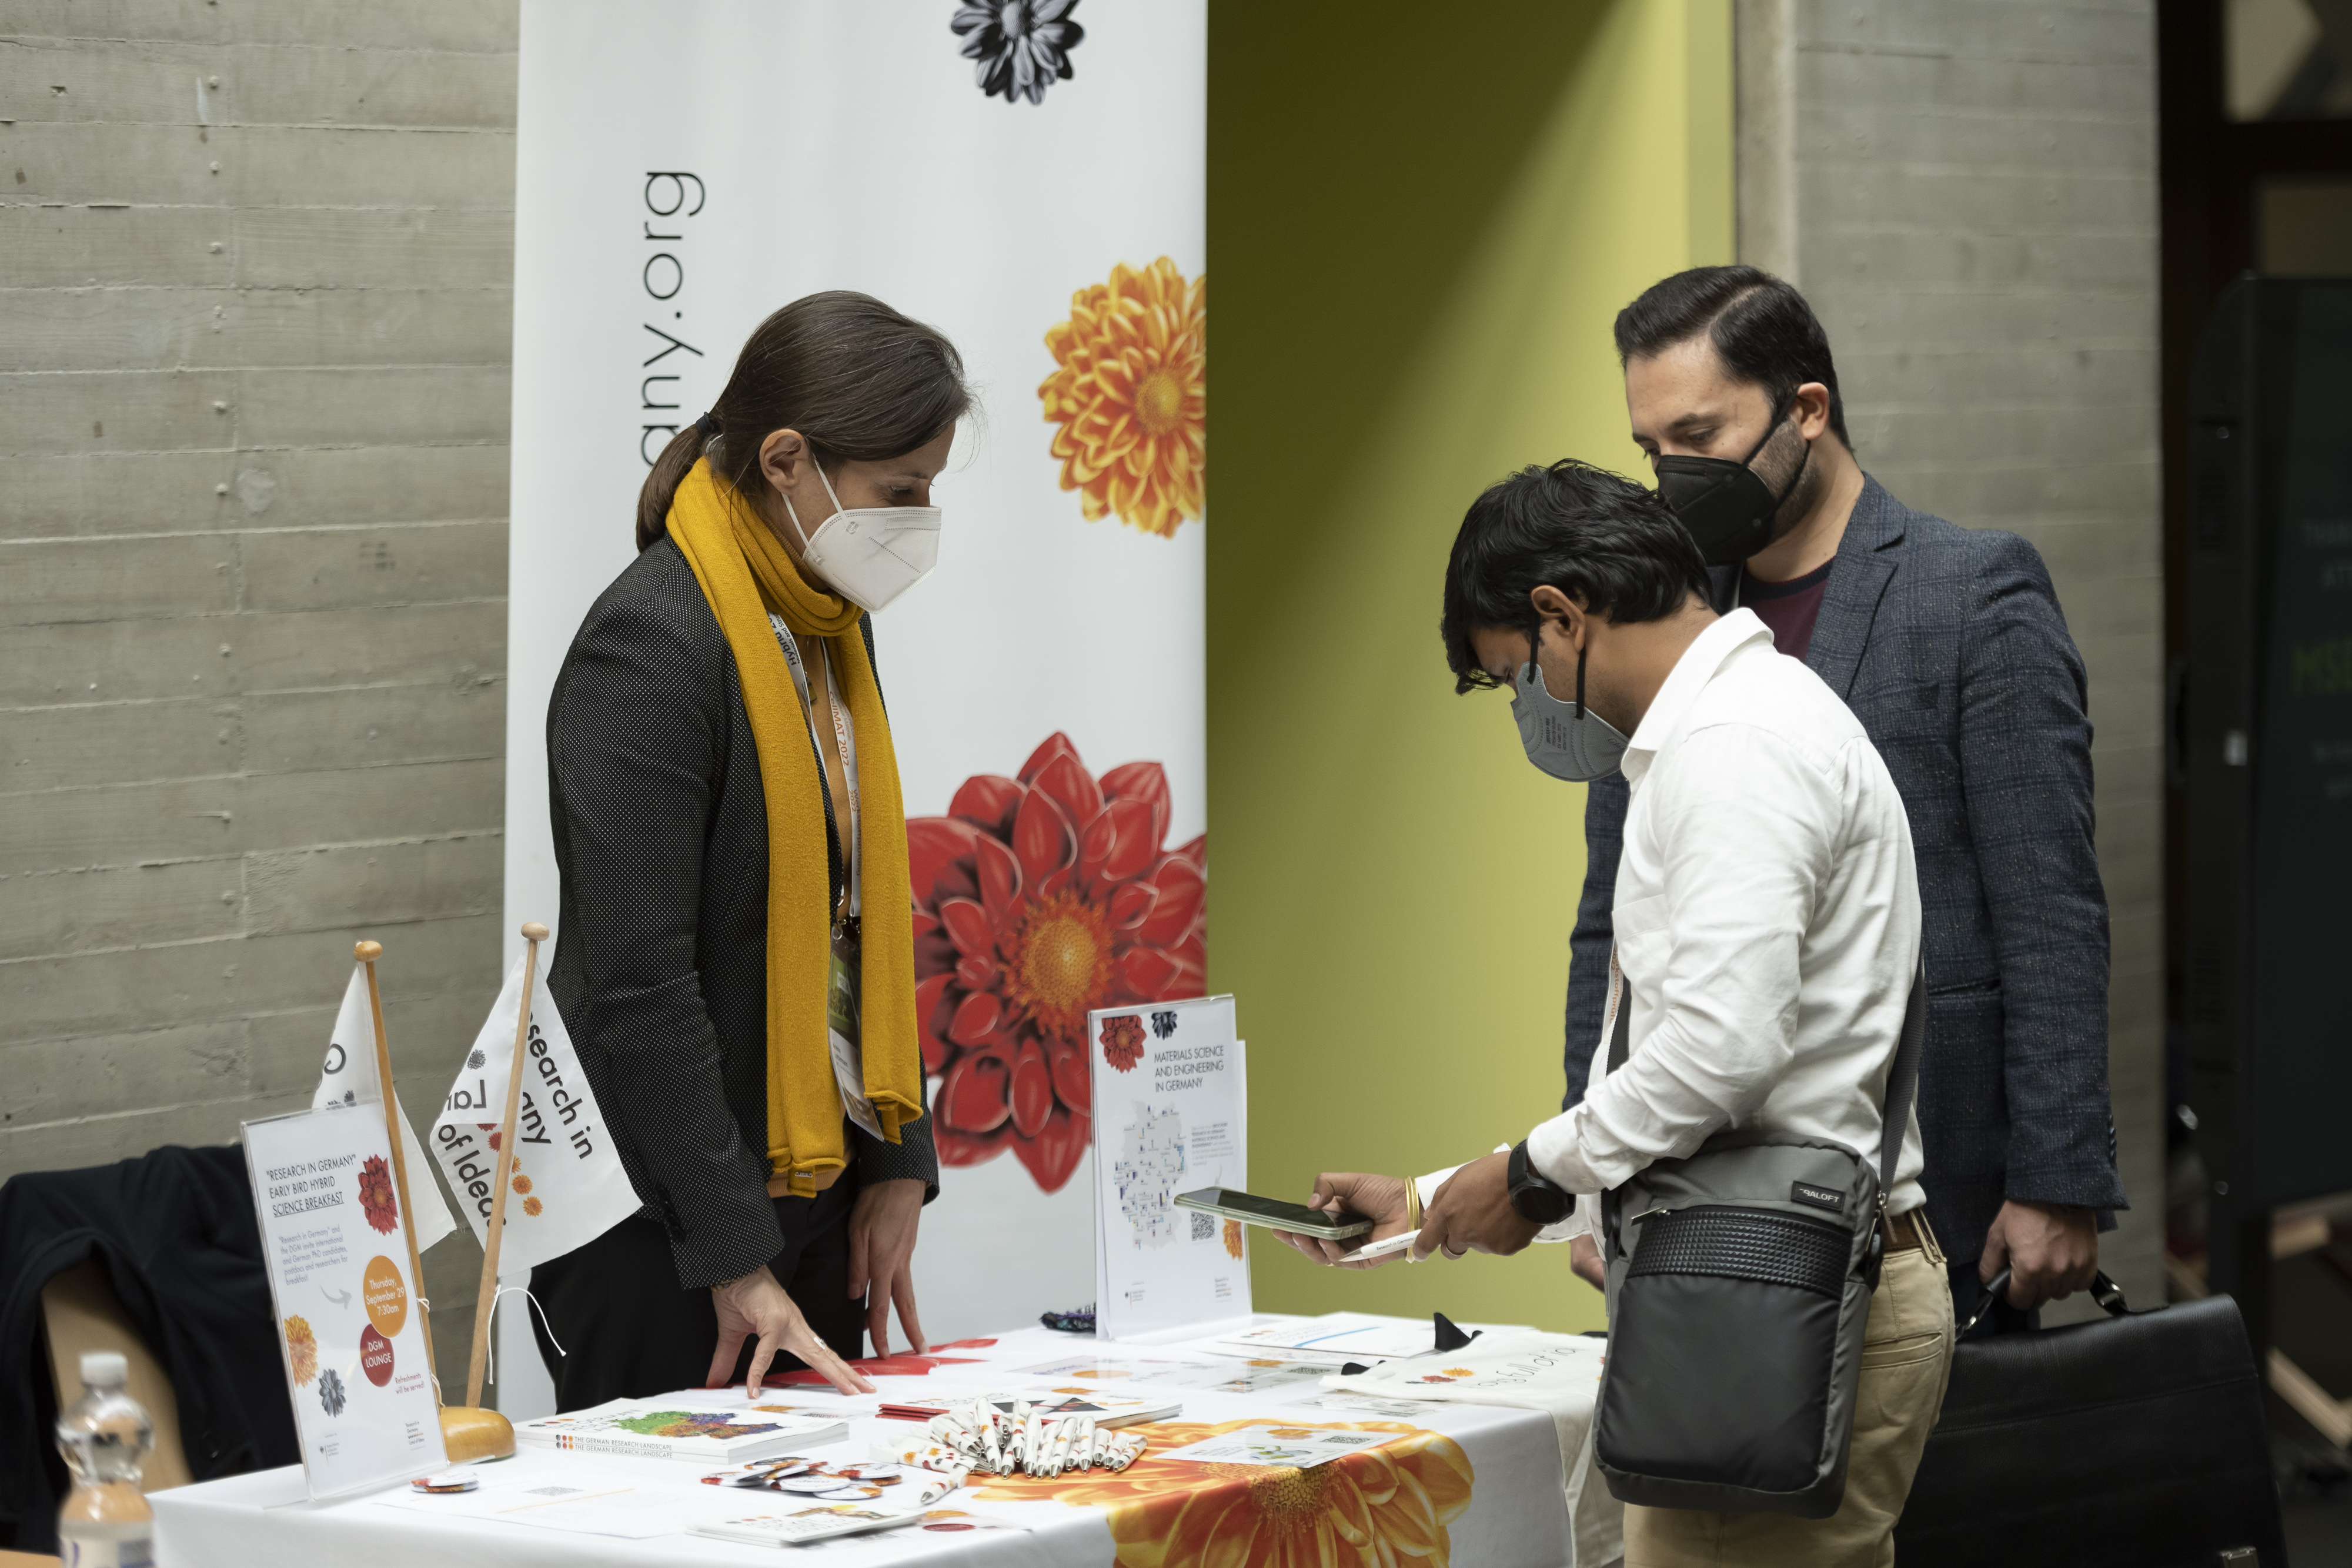 Obtaining advice at the “Research in Germany” information stand